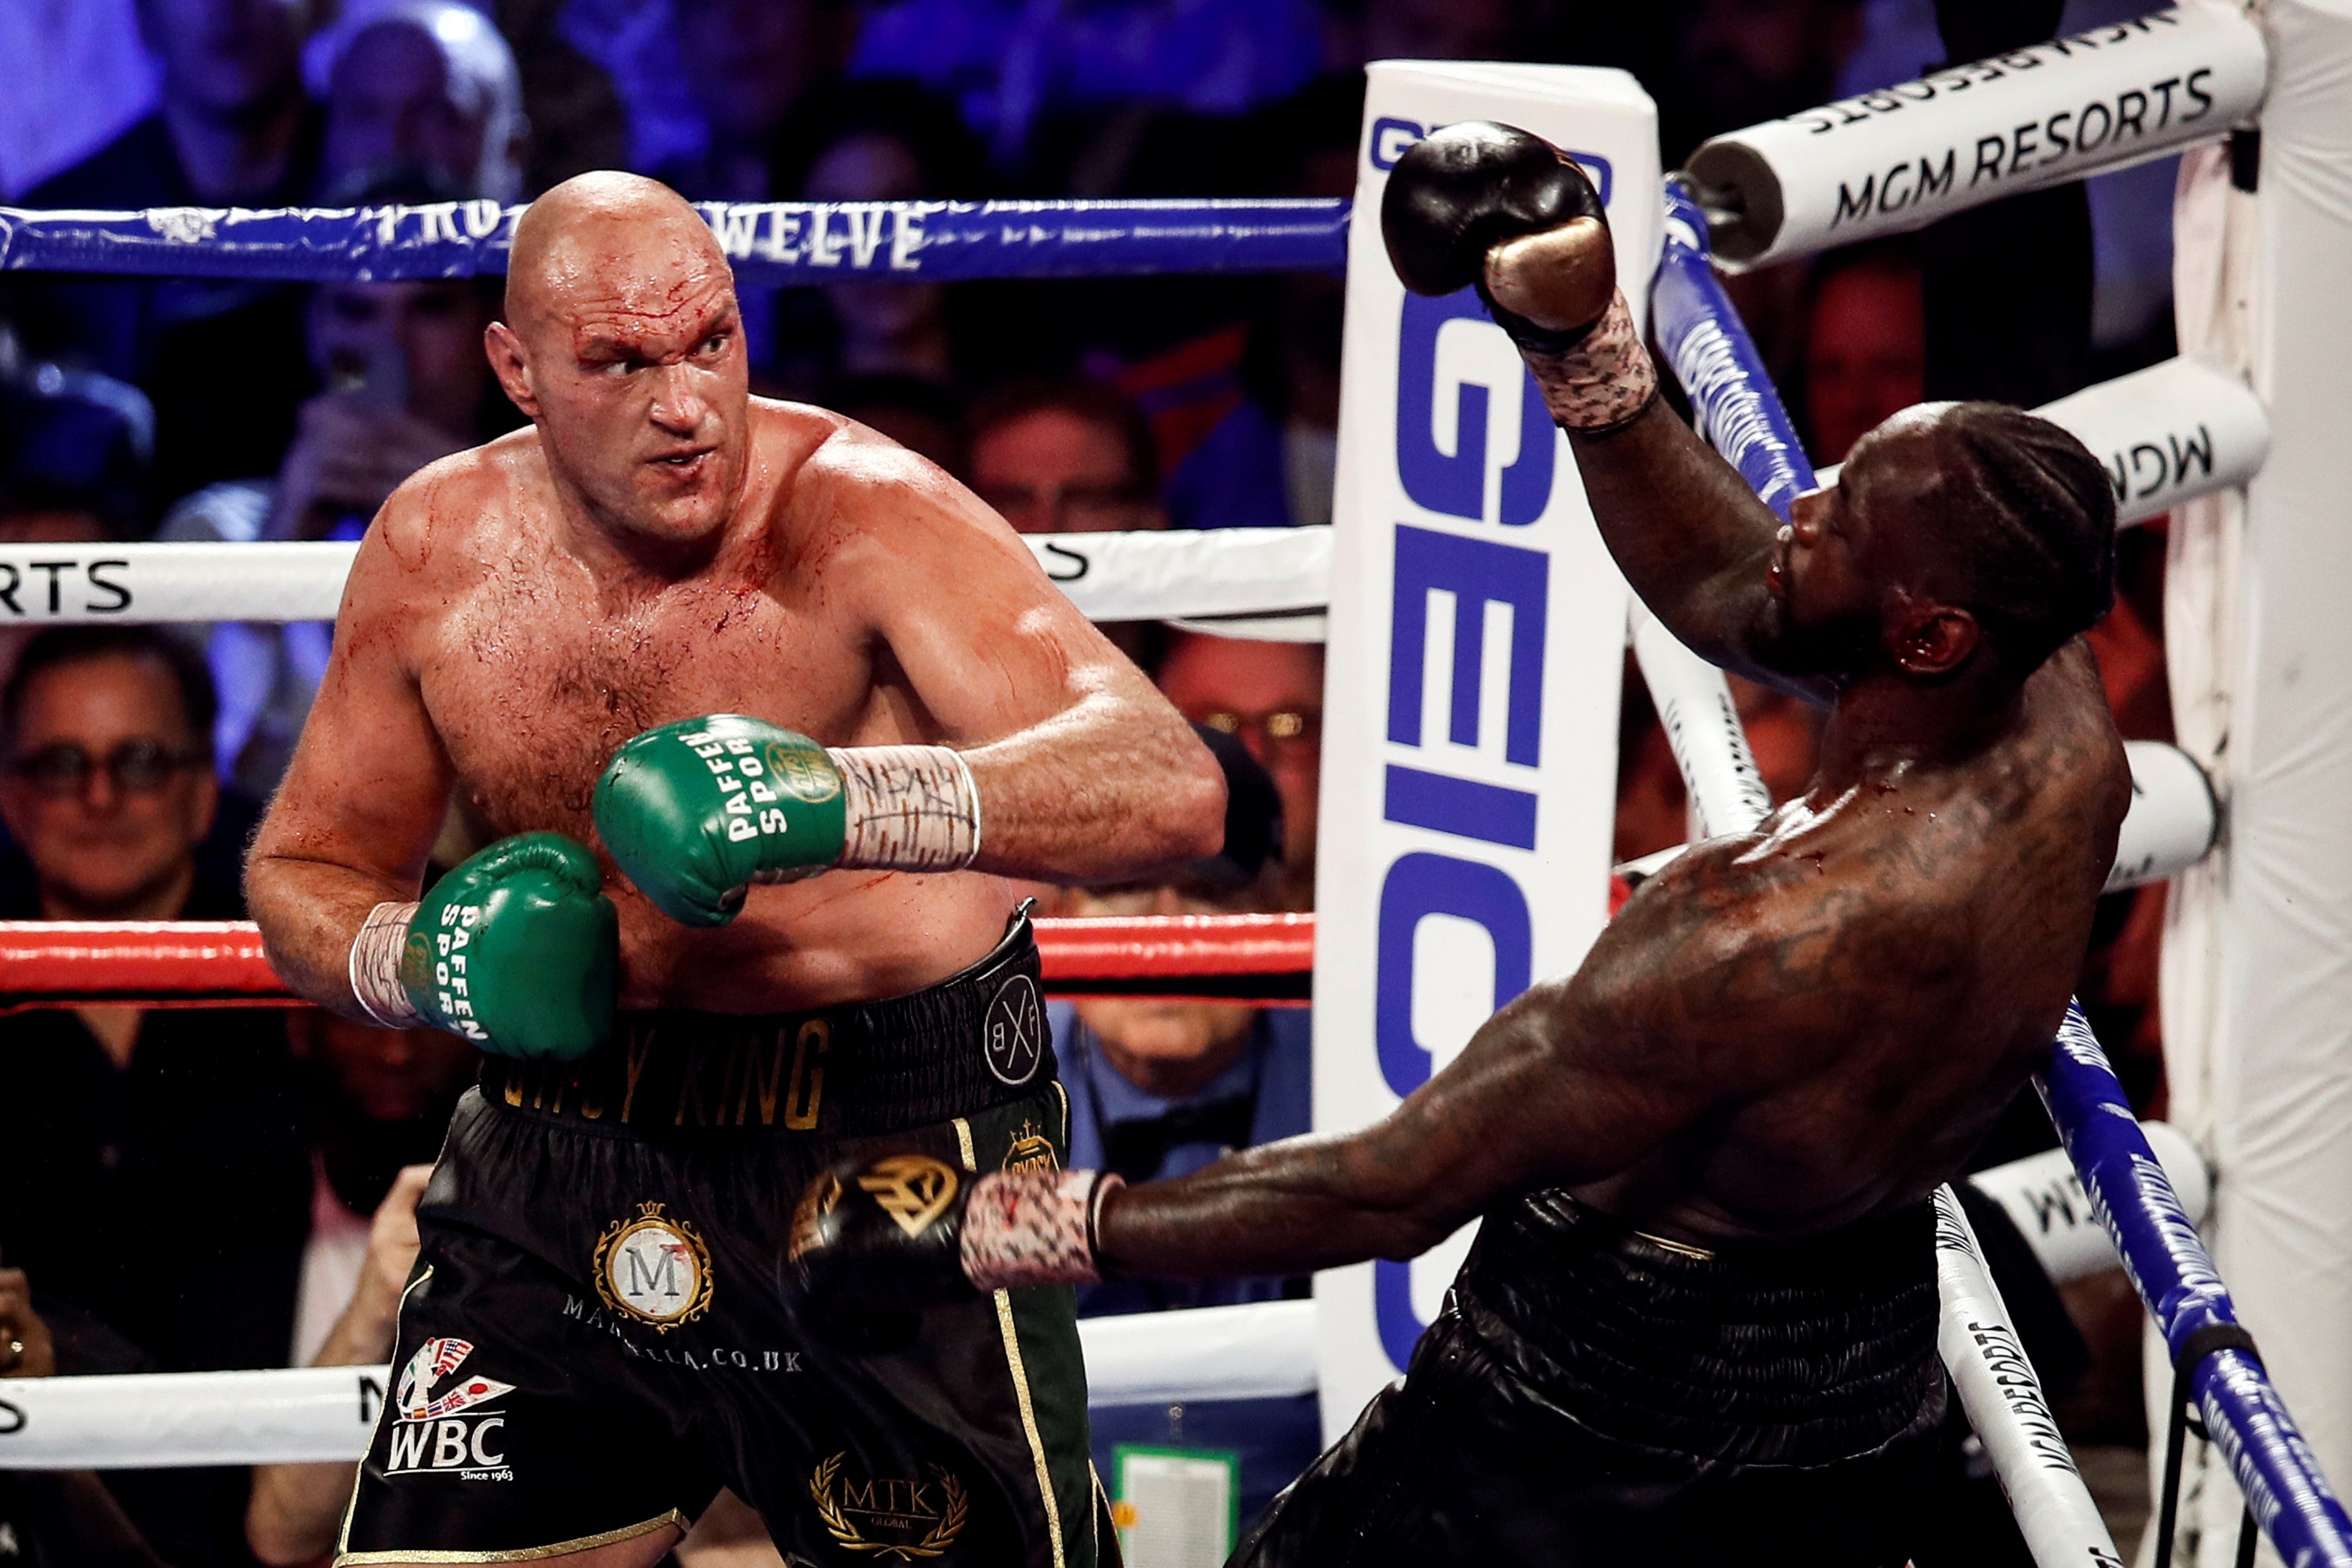 Tyson Fury of Britain (L) in action against Deontay Wilder of the USA (R) during the WBC World Heavyweight Championship title fight at the Garden Arena in Las Vegas, Nevada, USA, 22 February 2020. EFE/EPA/ETIENNE LAURENT/Archivo 